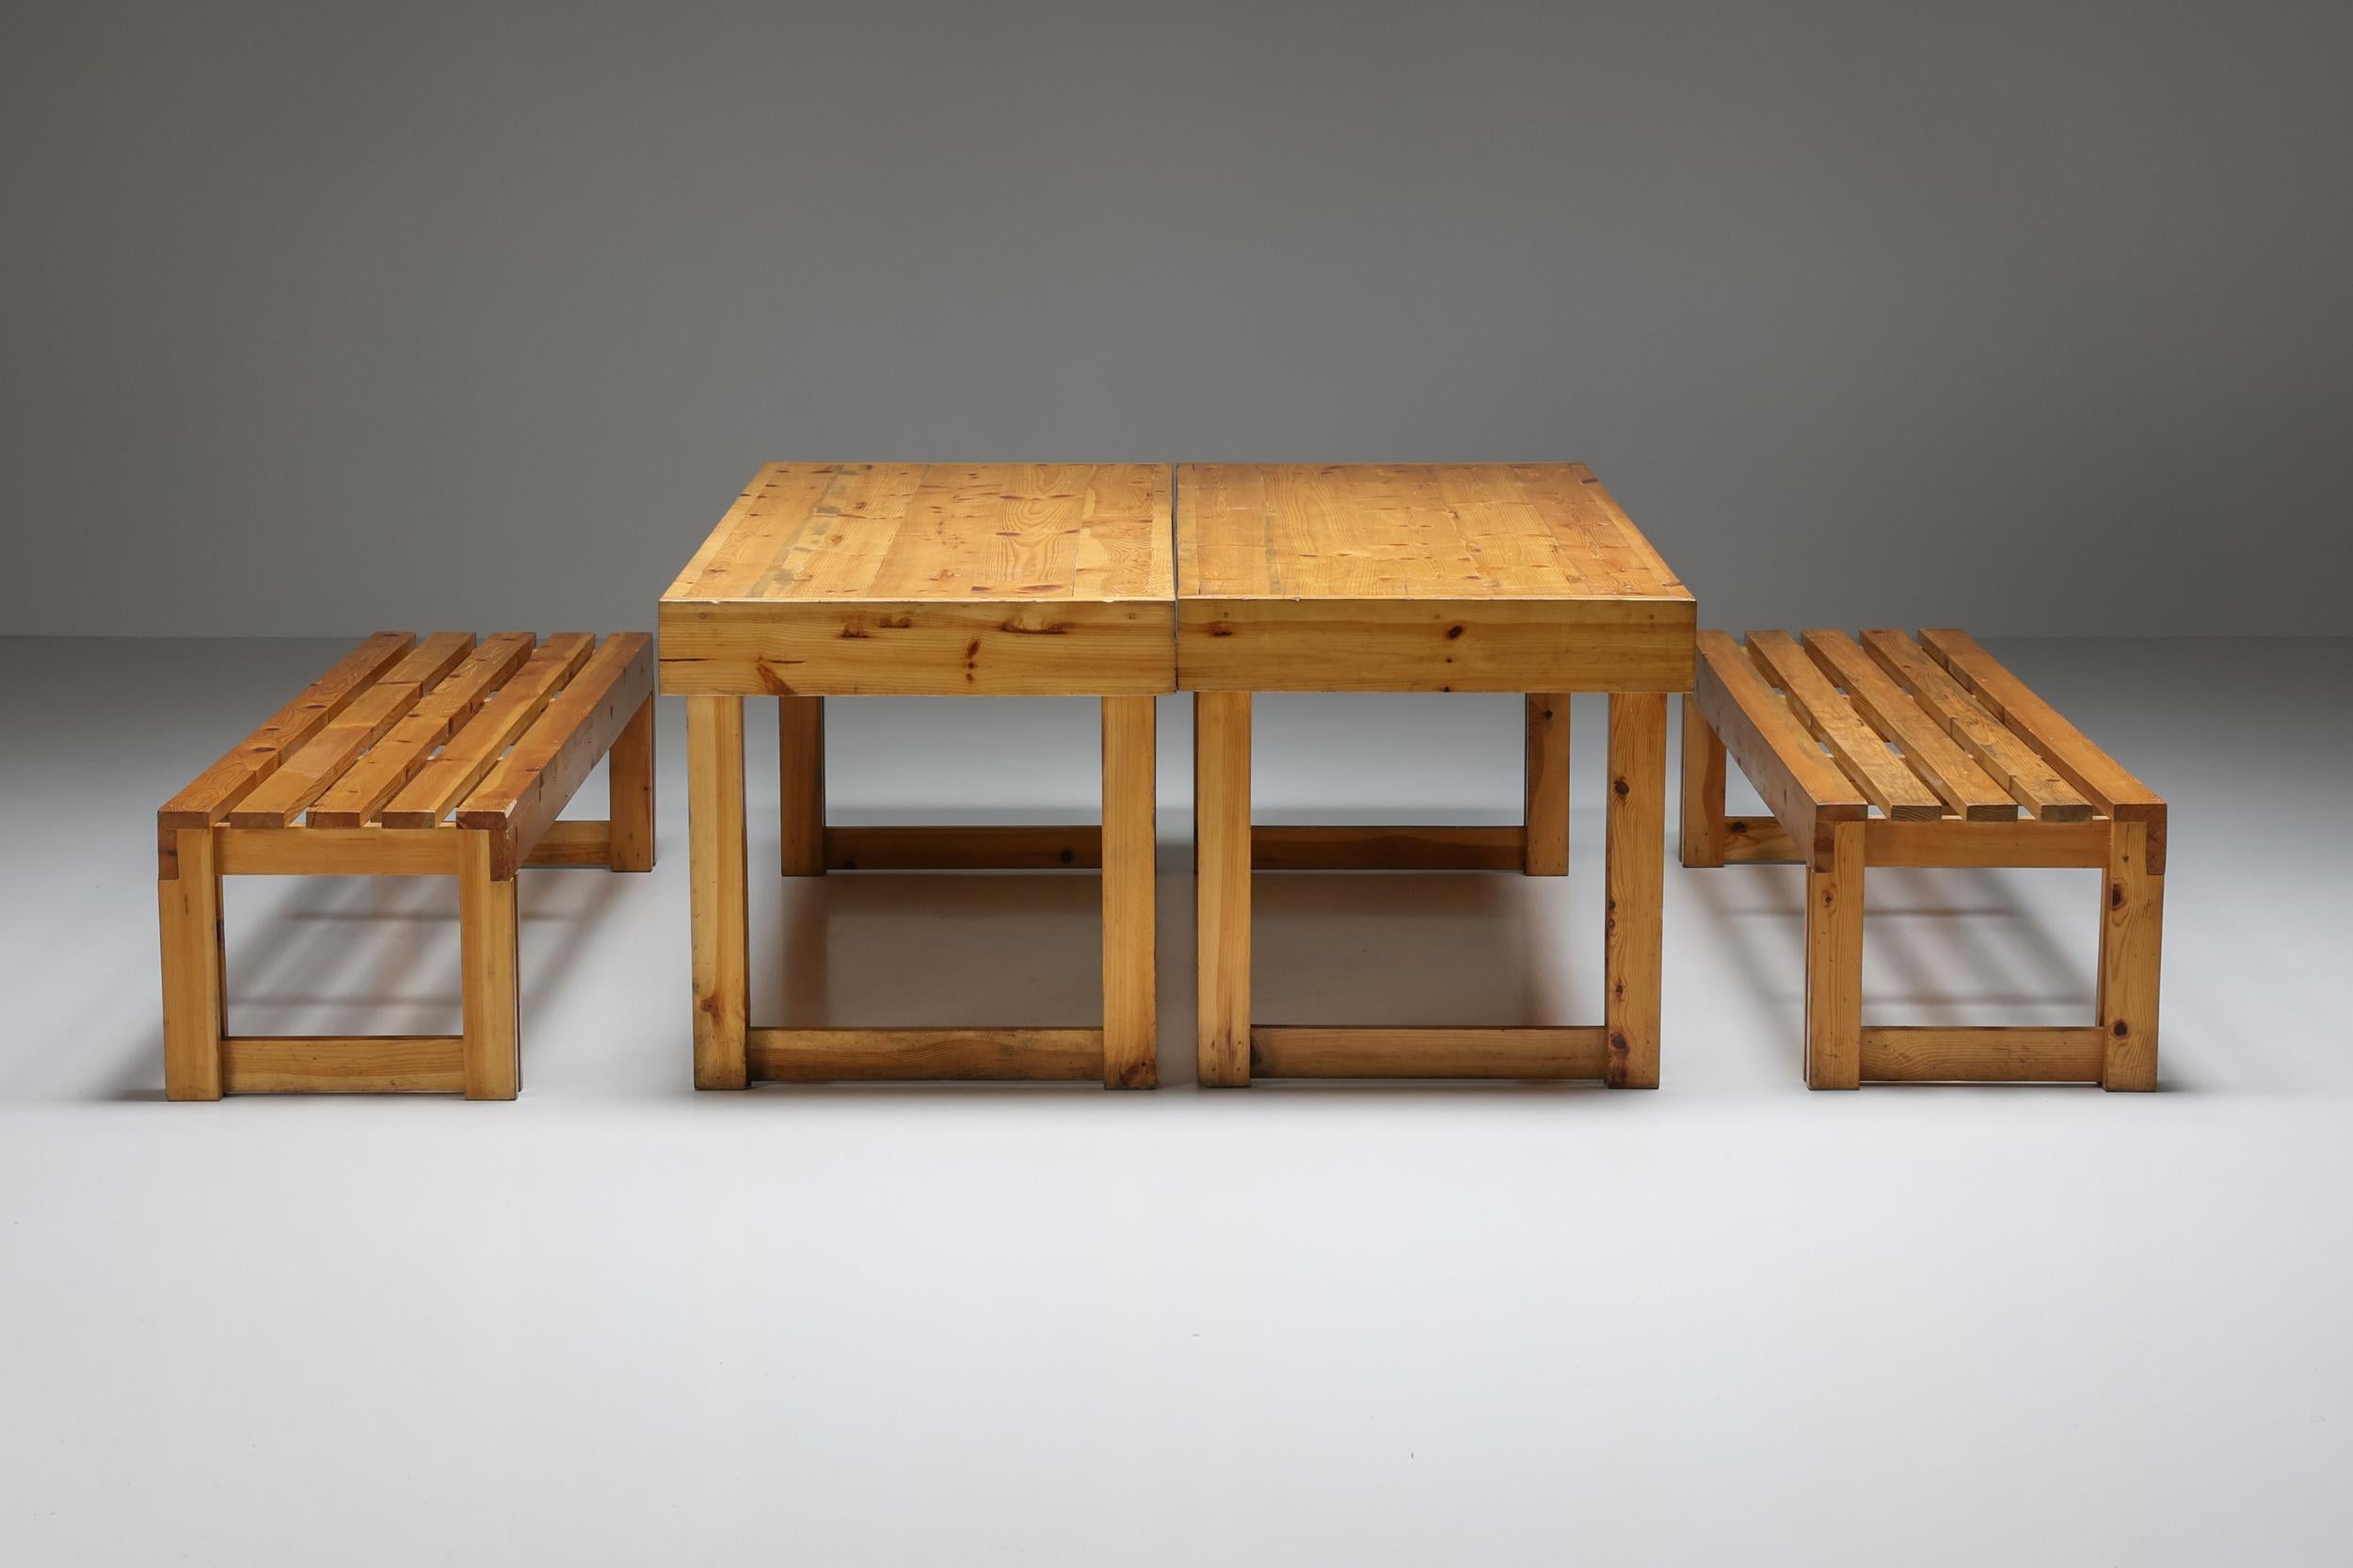 Italian Pine Tables from Old Vineyard, Modernist, Italy, 1960's For Sale 4